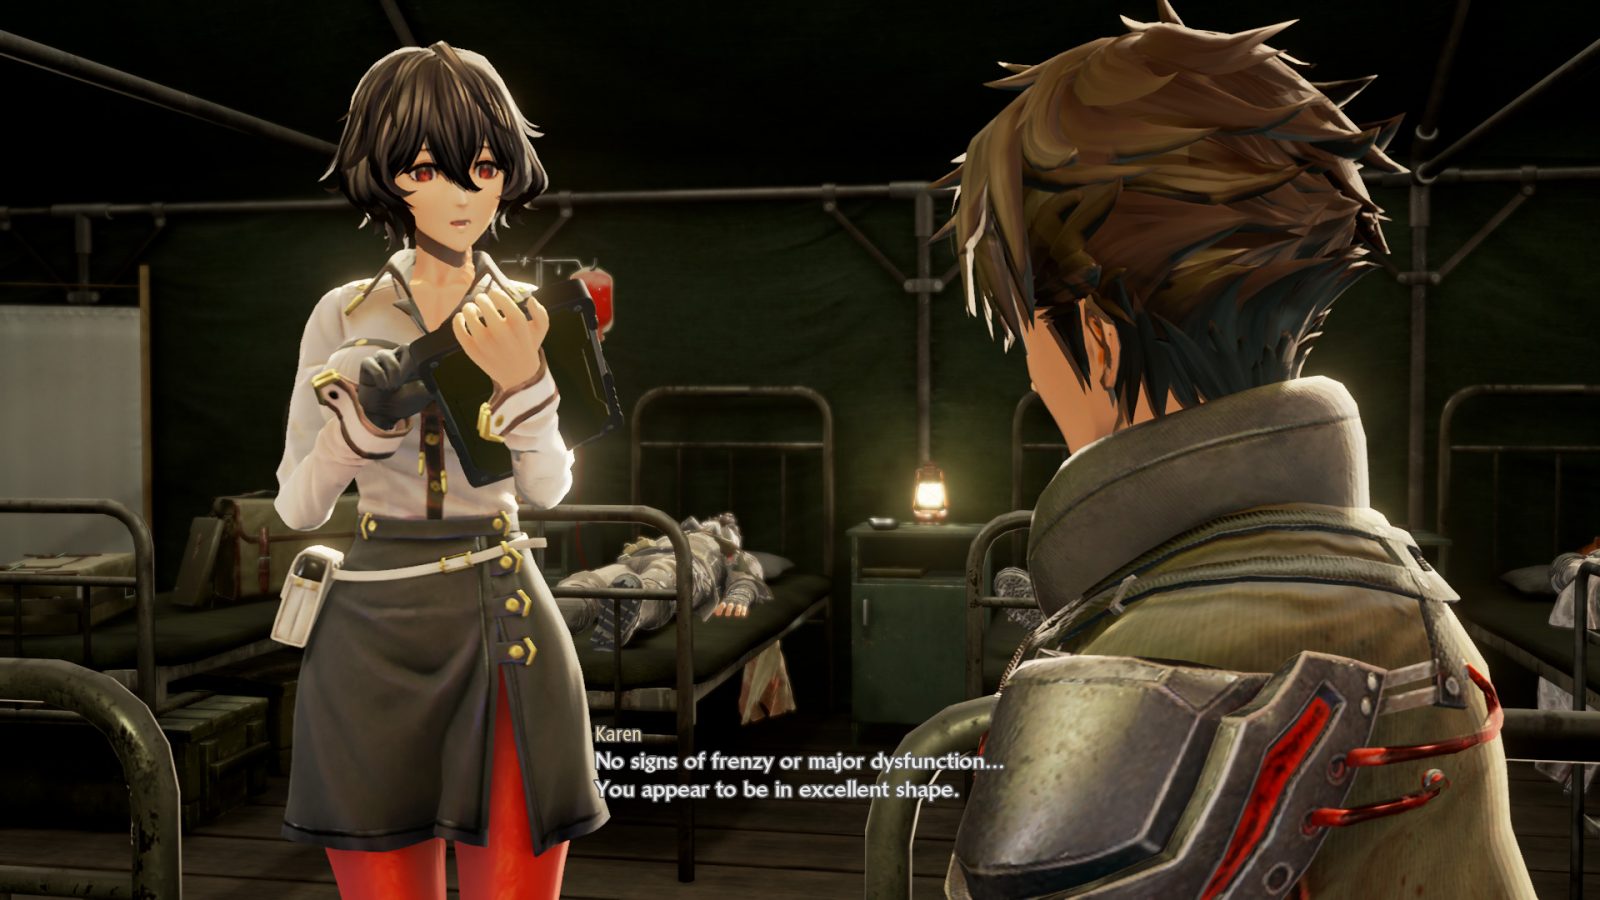 New Code Vein Screenshots Released Shows Off New Characters And